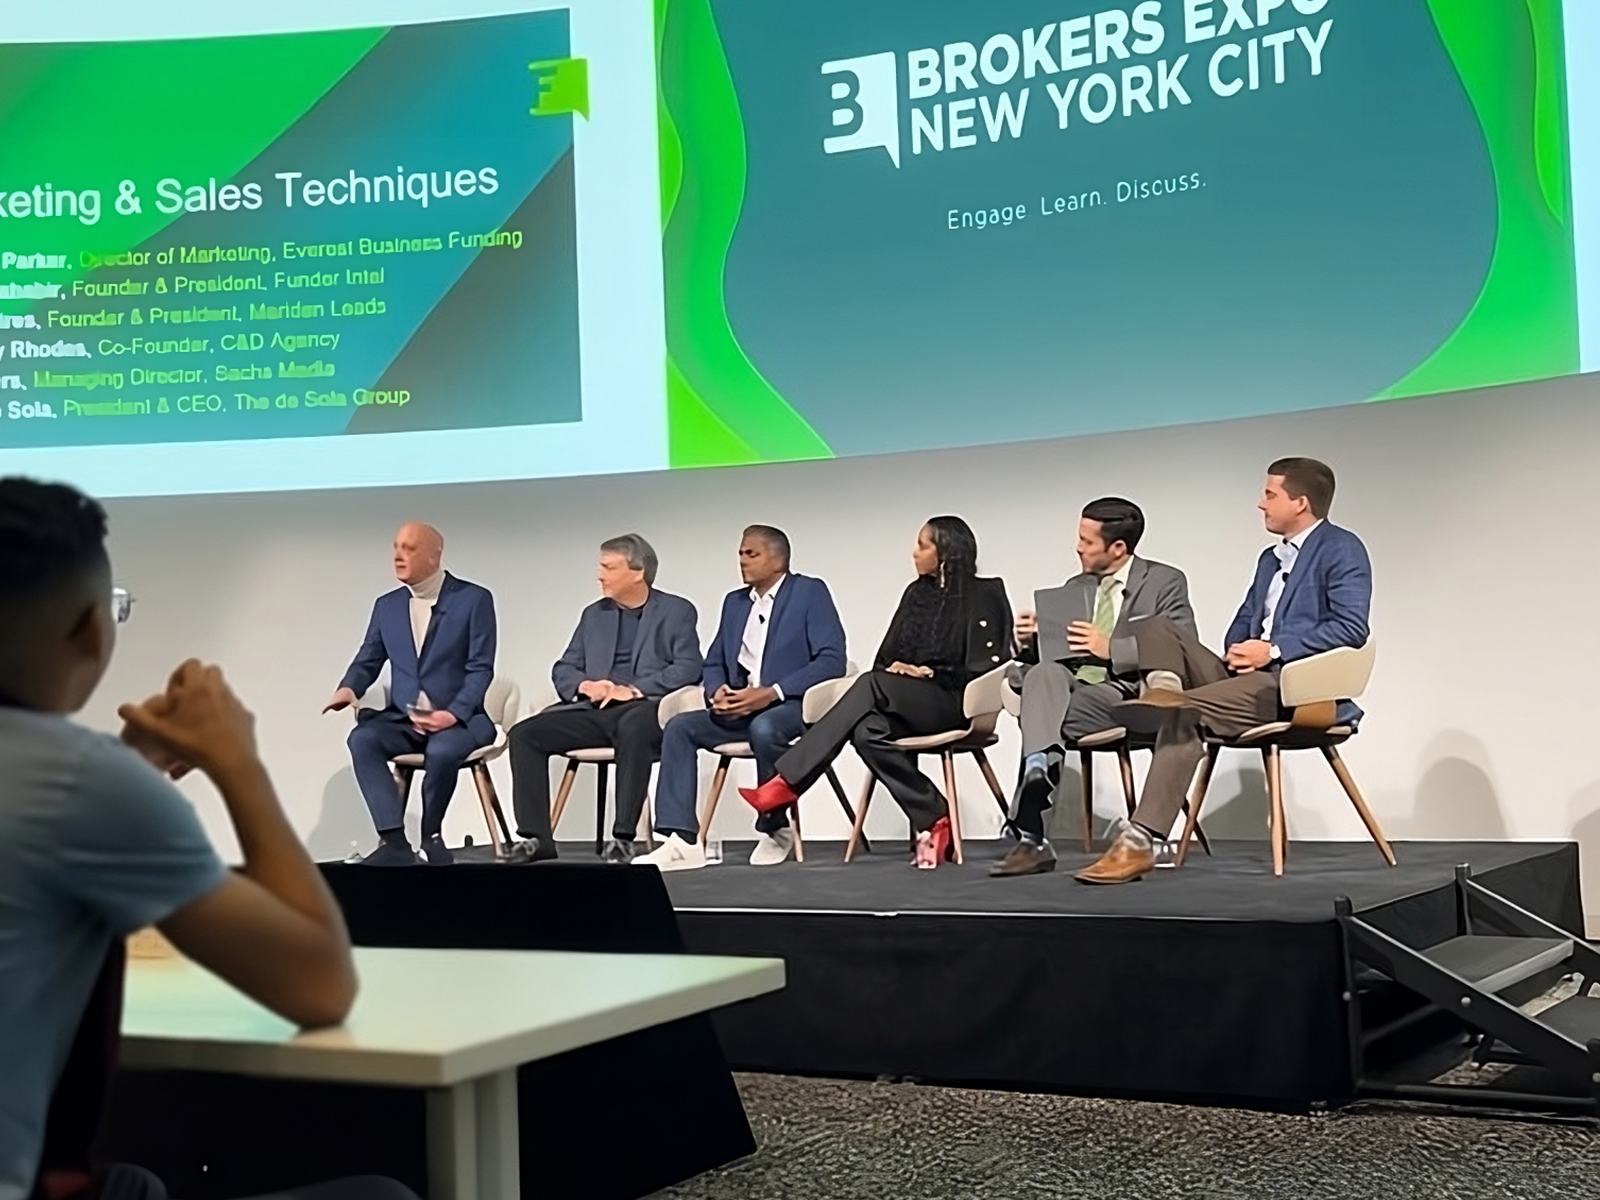 UAM Takes NYC: A Brokers Expo 2023